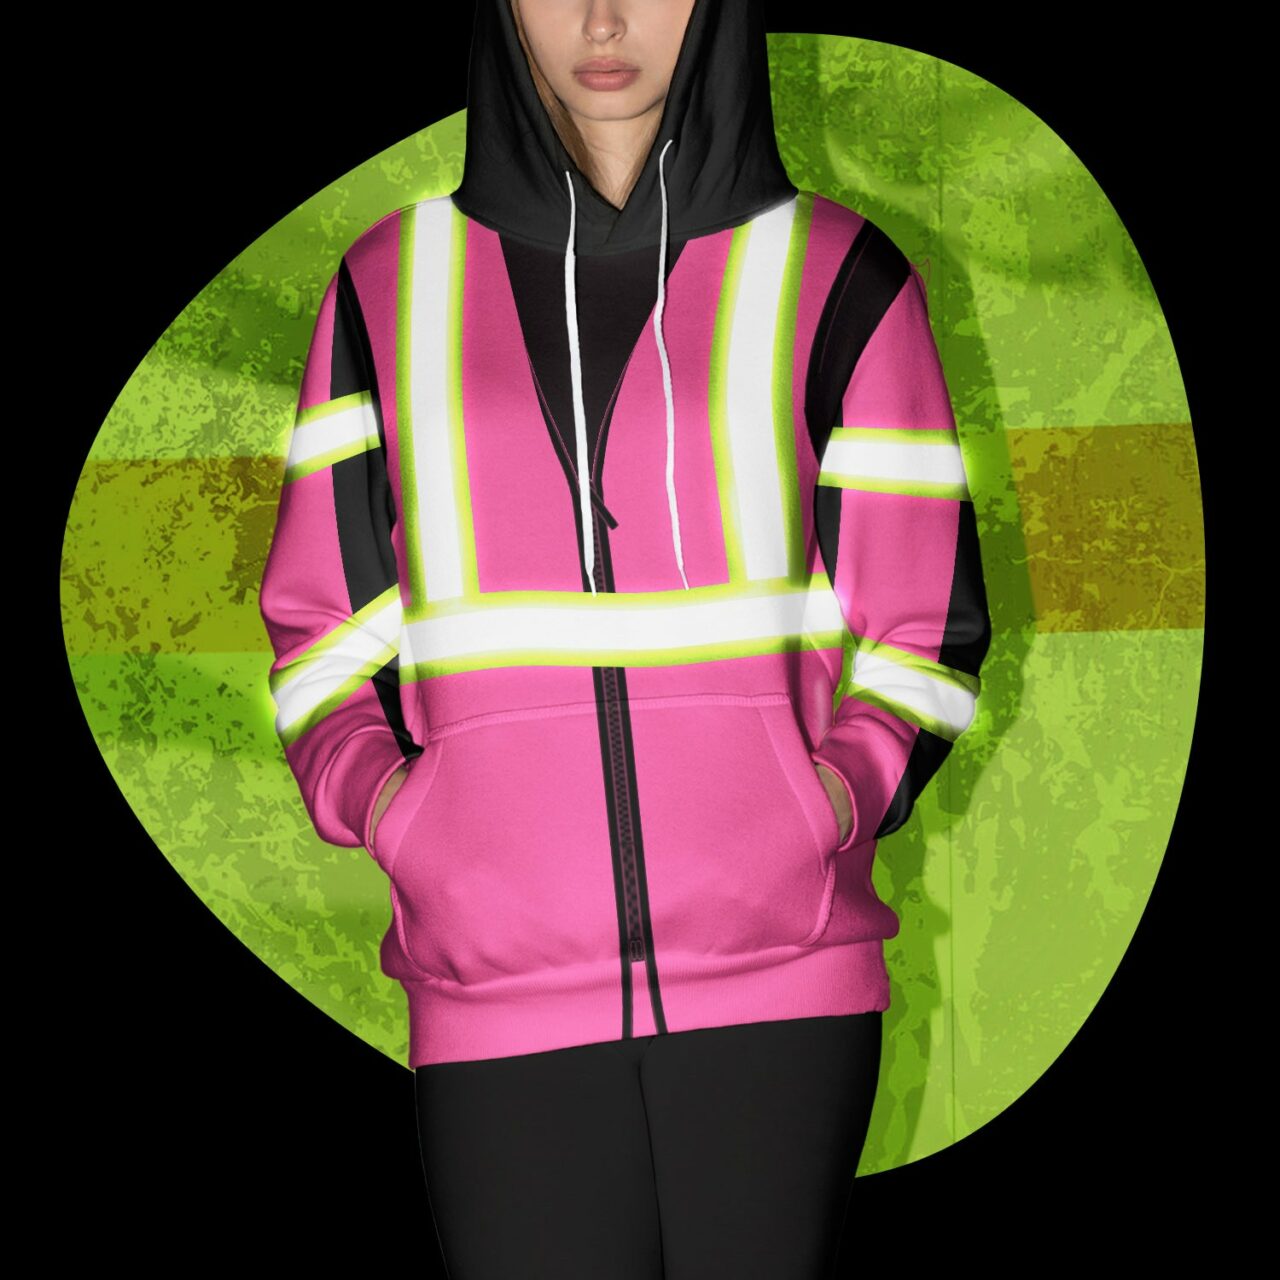 Printed All Hi Hoodie Workwear Reflective Safety Vis Pink 3D Over For Women